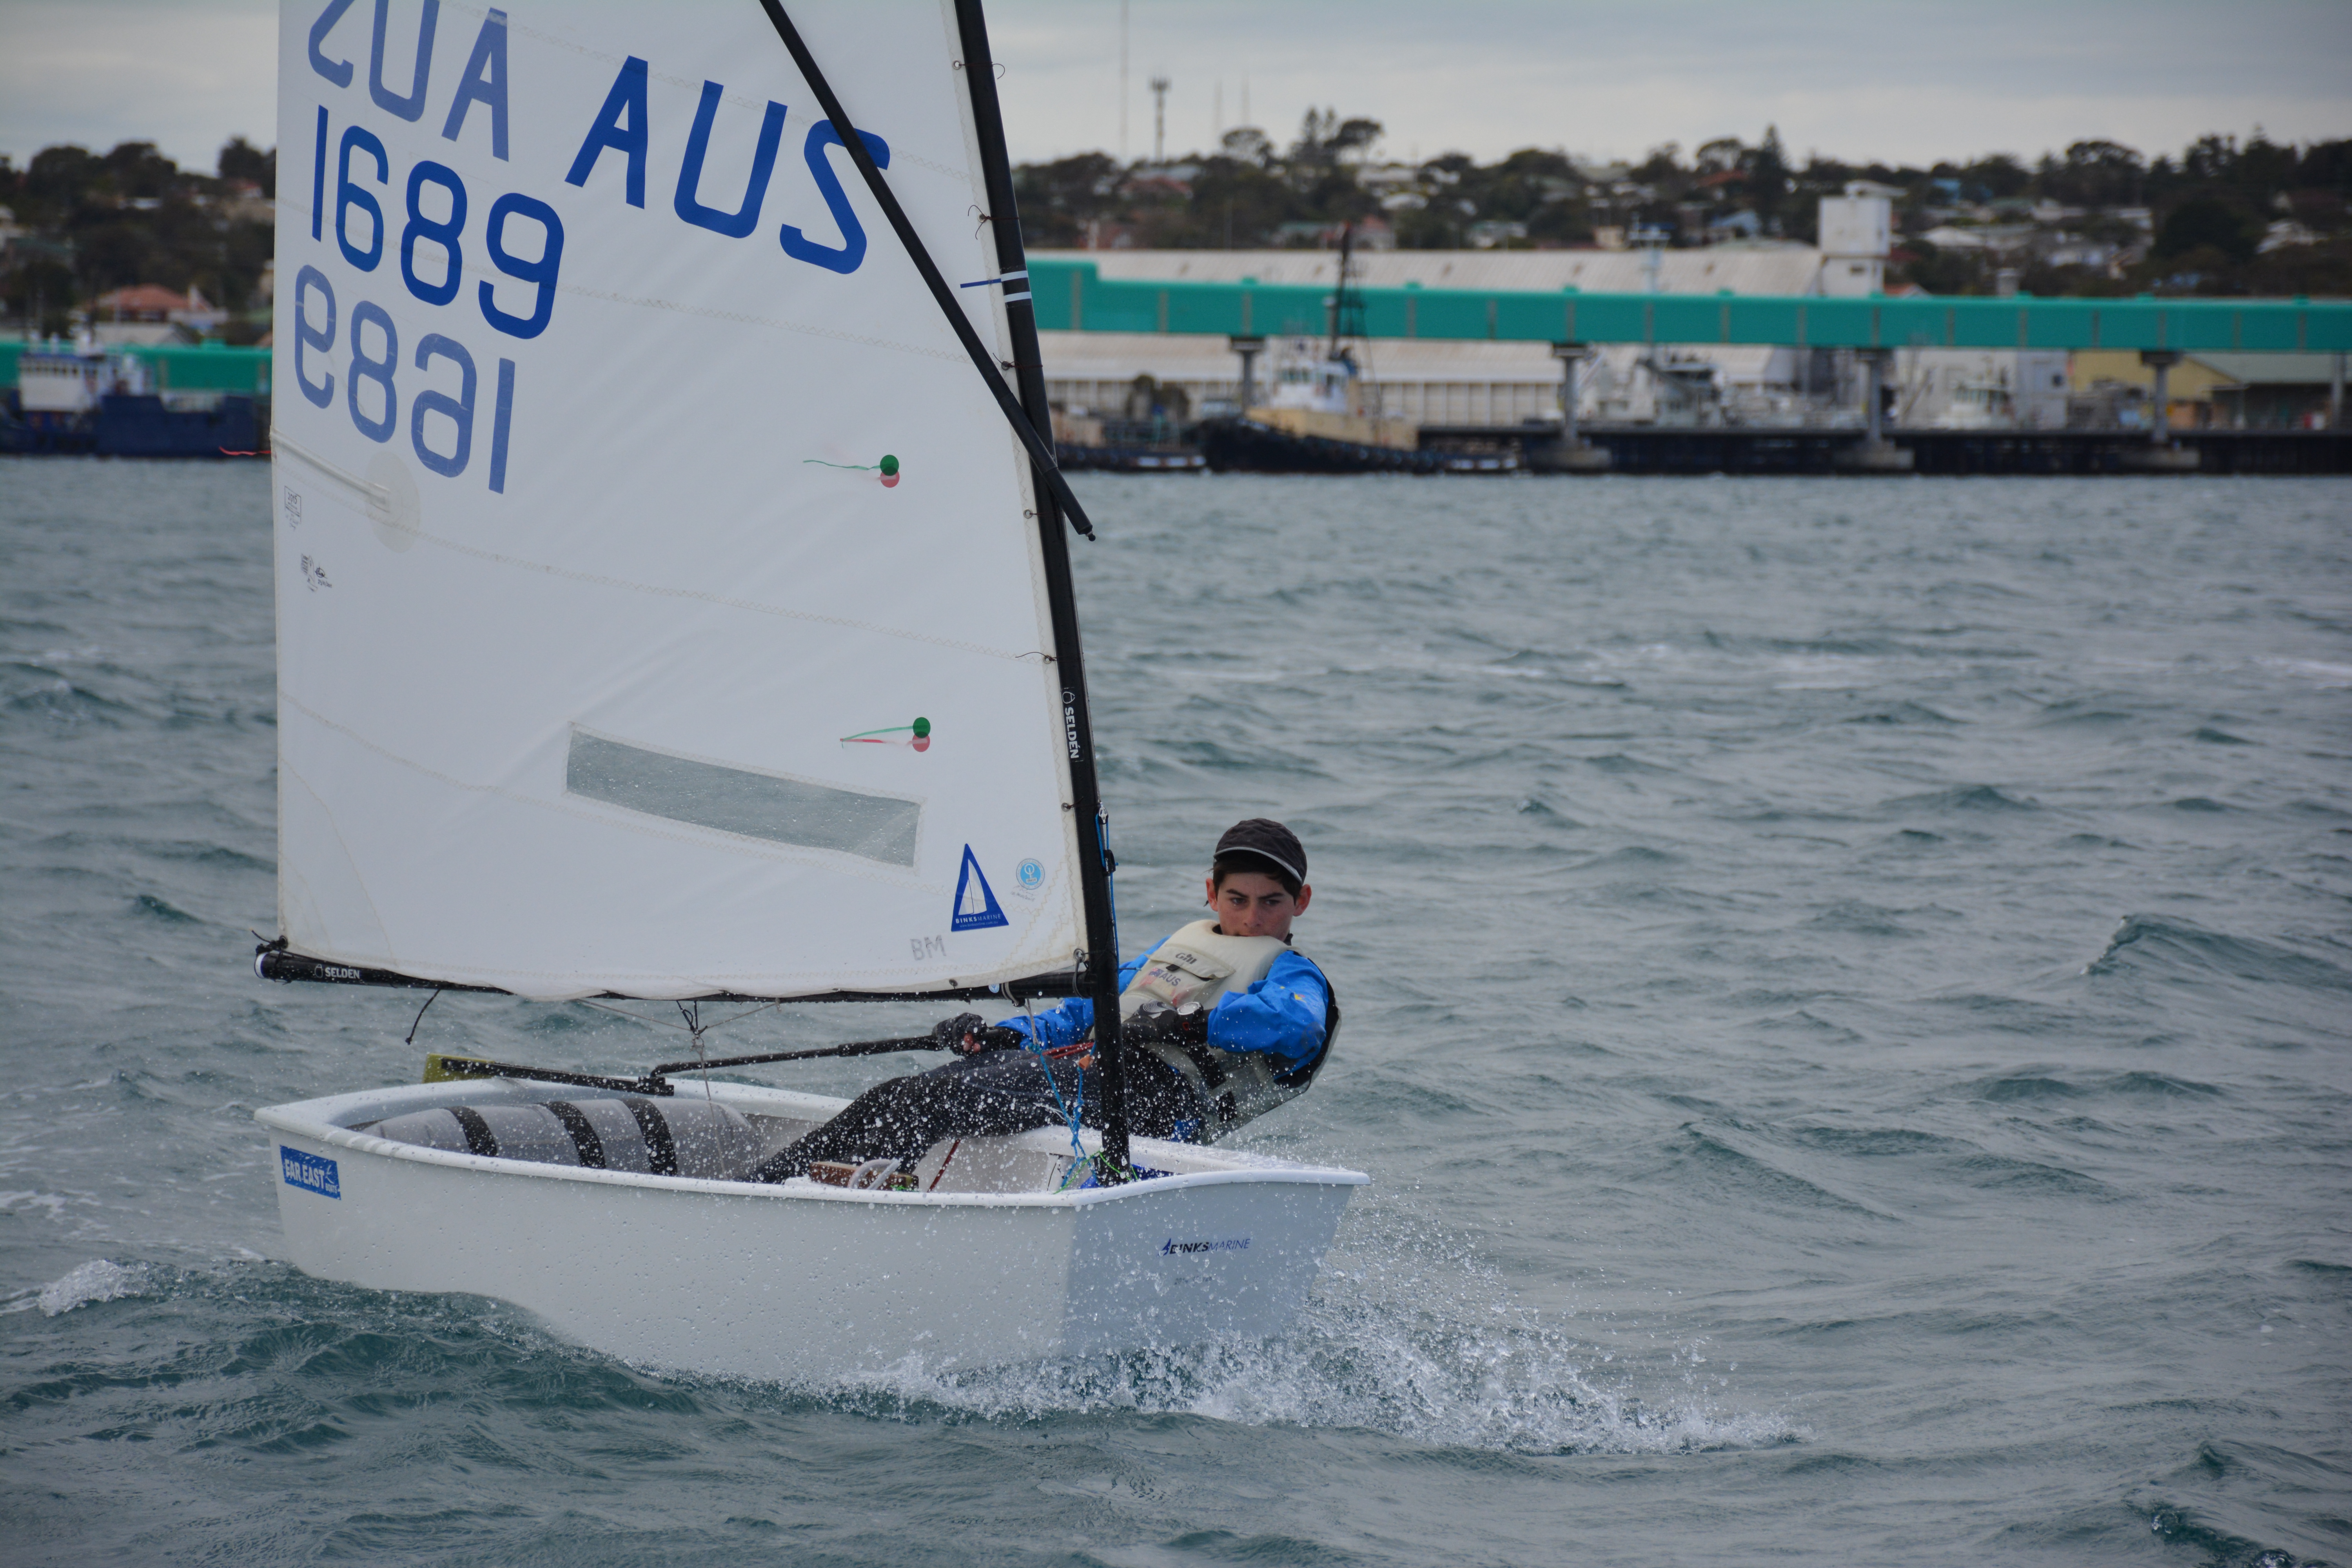 Great youth sailing despite wild weather